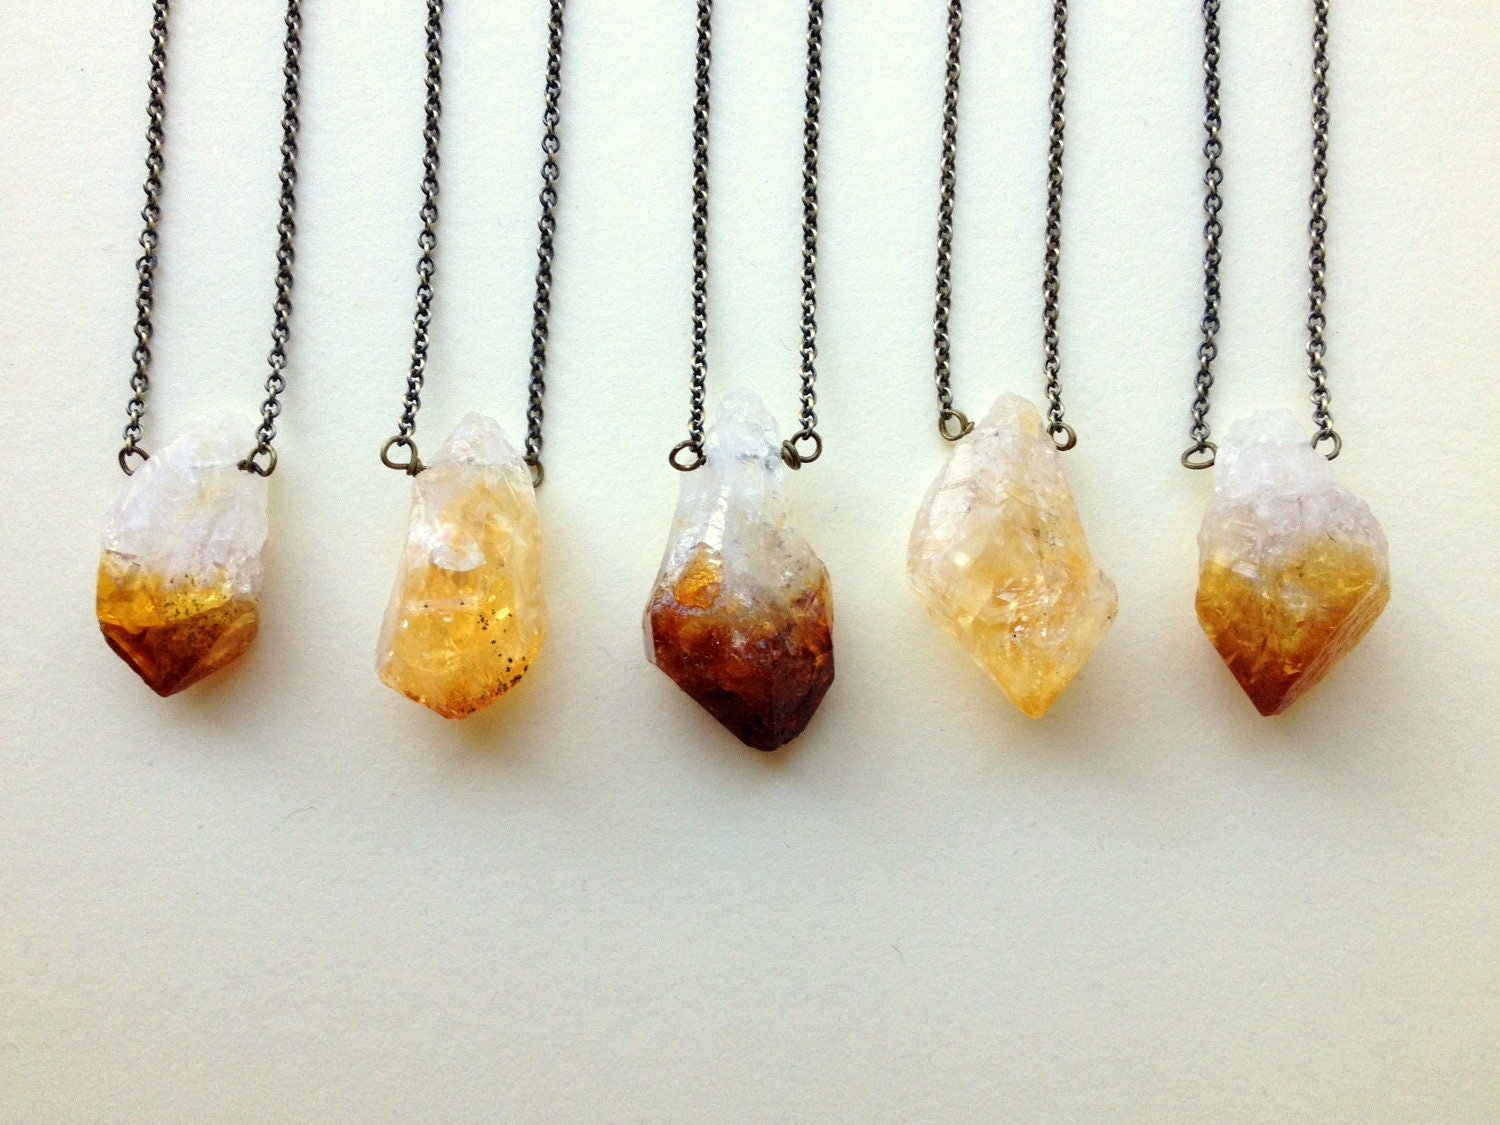 Large Raw Citrine Necklace by LovelyMusings on Etsy